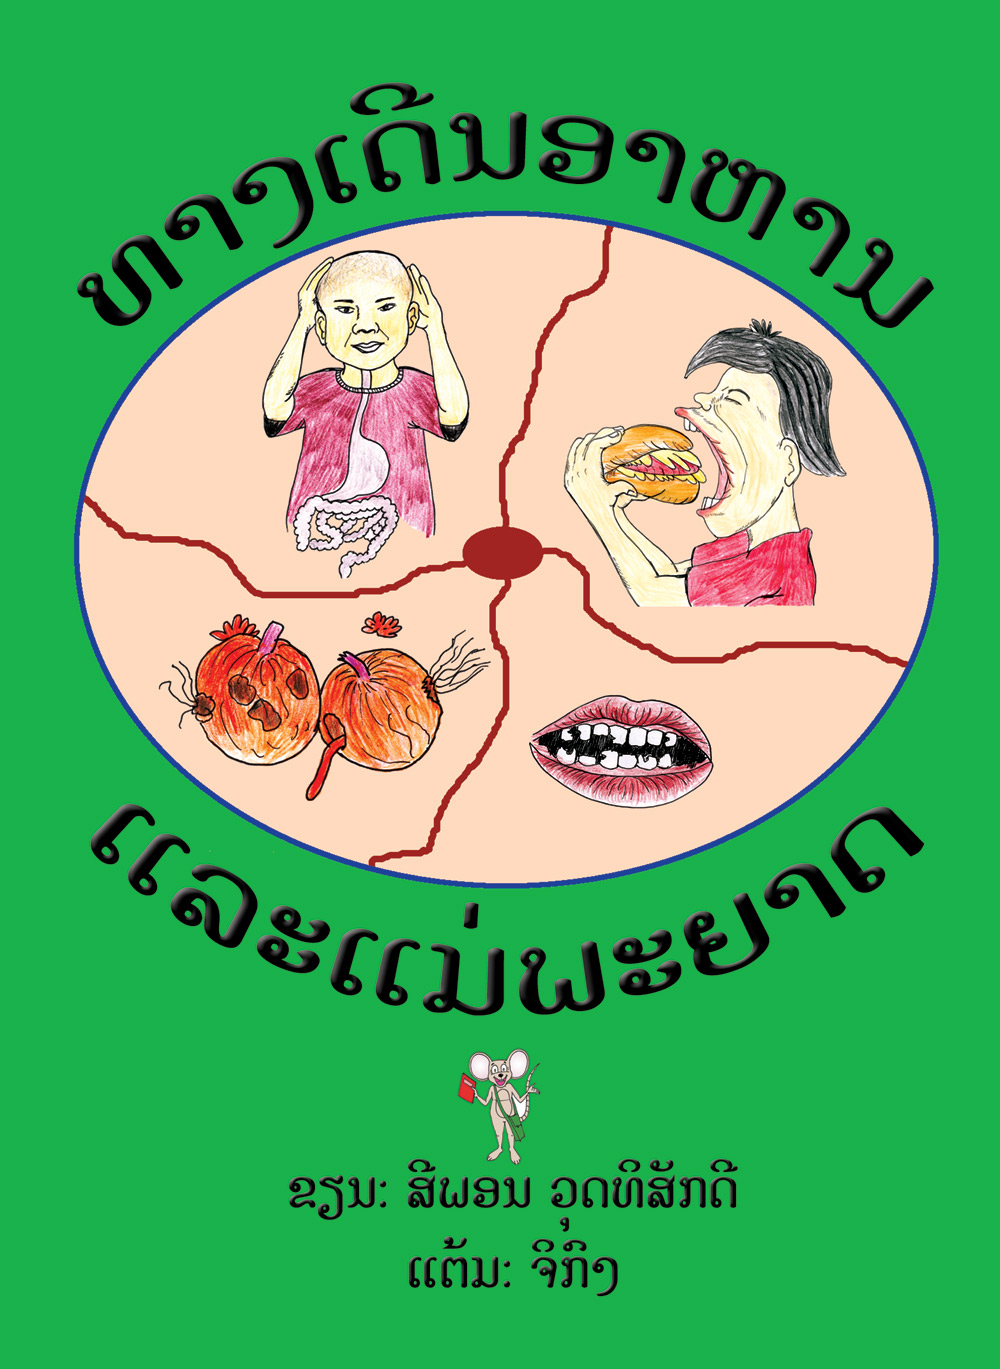 What Happens to Your Food? large book cover, published in Lao language